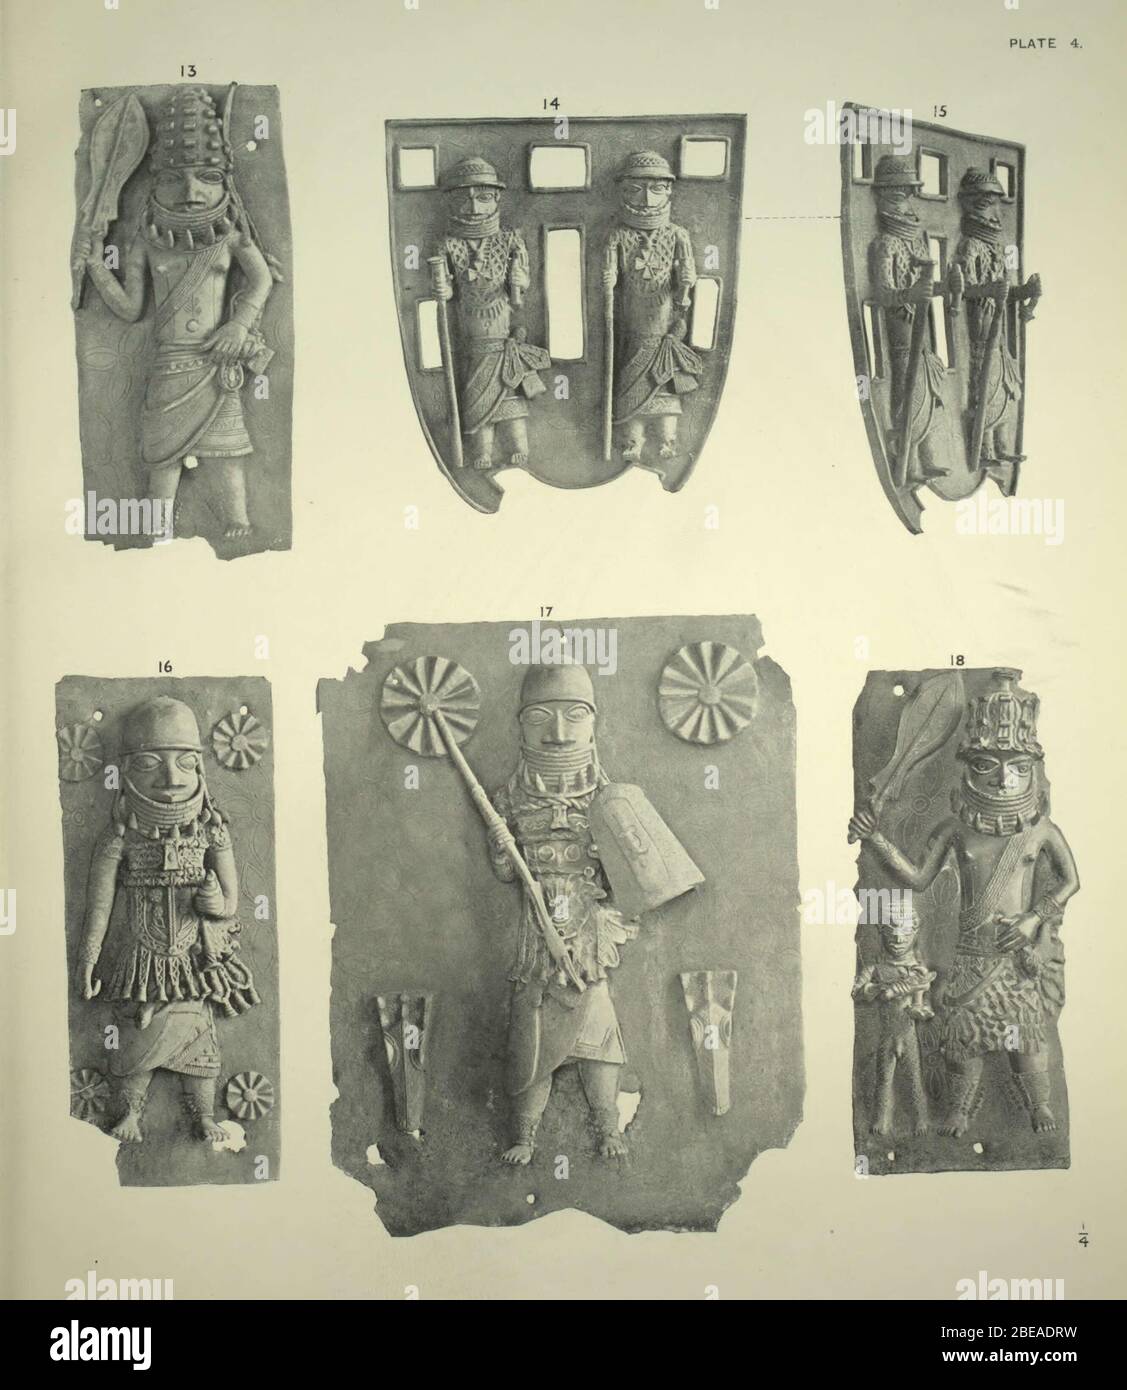 'English: DESCRIPTION OF PLATE IV. Fig. 13.--Bronze plaque, figure of warrior, feather in cap; broad leaf-shaped sword in right hand. Coral choker, badge of rank. Leopards' teeth necklace. Coral sash; ground ornamented with leaf-shaped foil, ornaments incised. Figs. 14 and 15.--Bronze ægis or plaque, with representations of two figures with staves in their right hands. Coral chokers, badge of rank. On the breasts are two Maltese crosses hanging from the necks, which appear to be European Orders. The objects held in left hands have been broken off. The hats are similar to that on the head of th Stock Photo